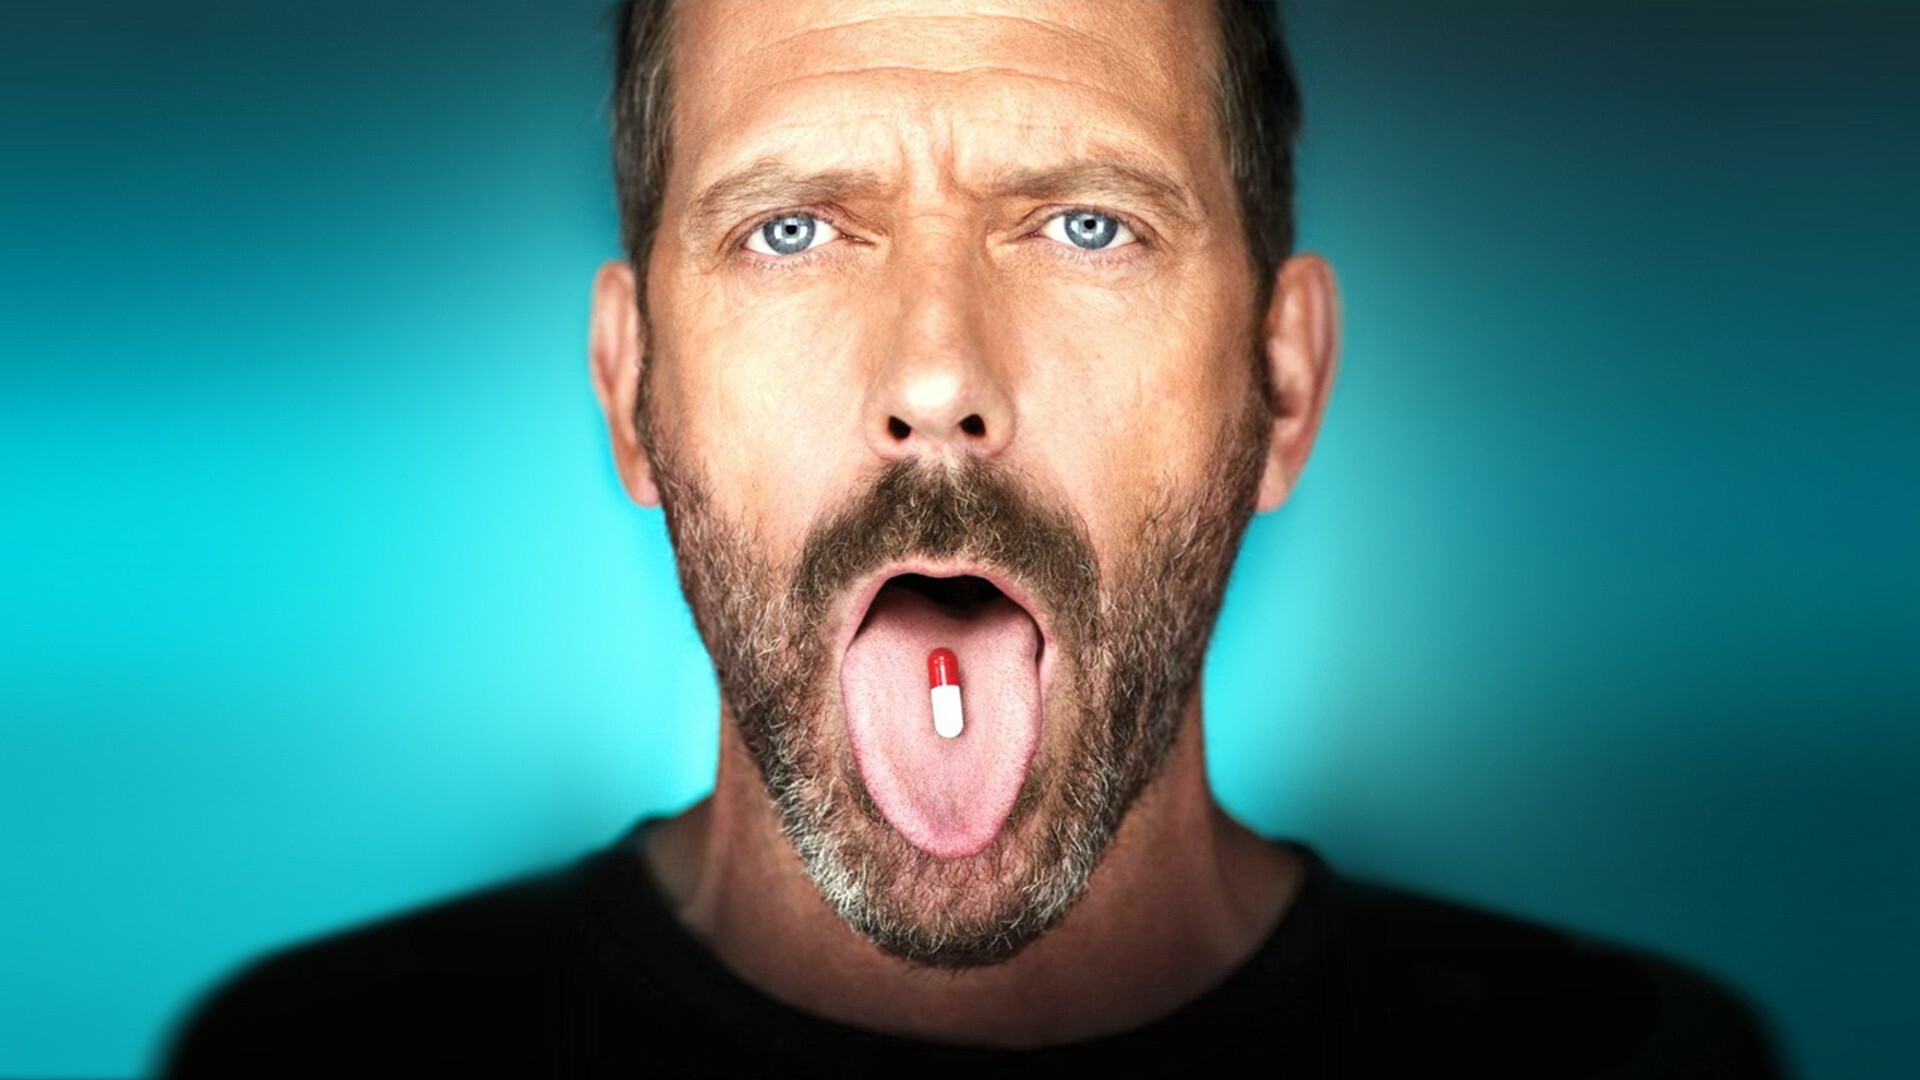 House M.D.: Vicodin, A rebellious diagnostician with a double specialty in infectious disease and nephrology. 1920x1080 Full HD Wallpaper.